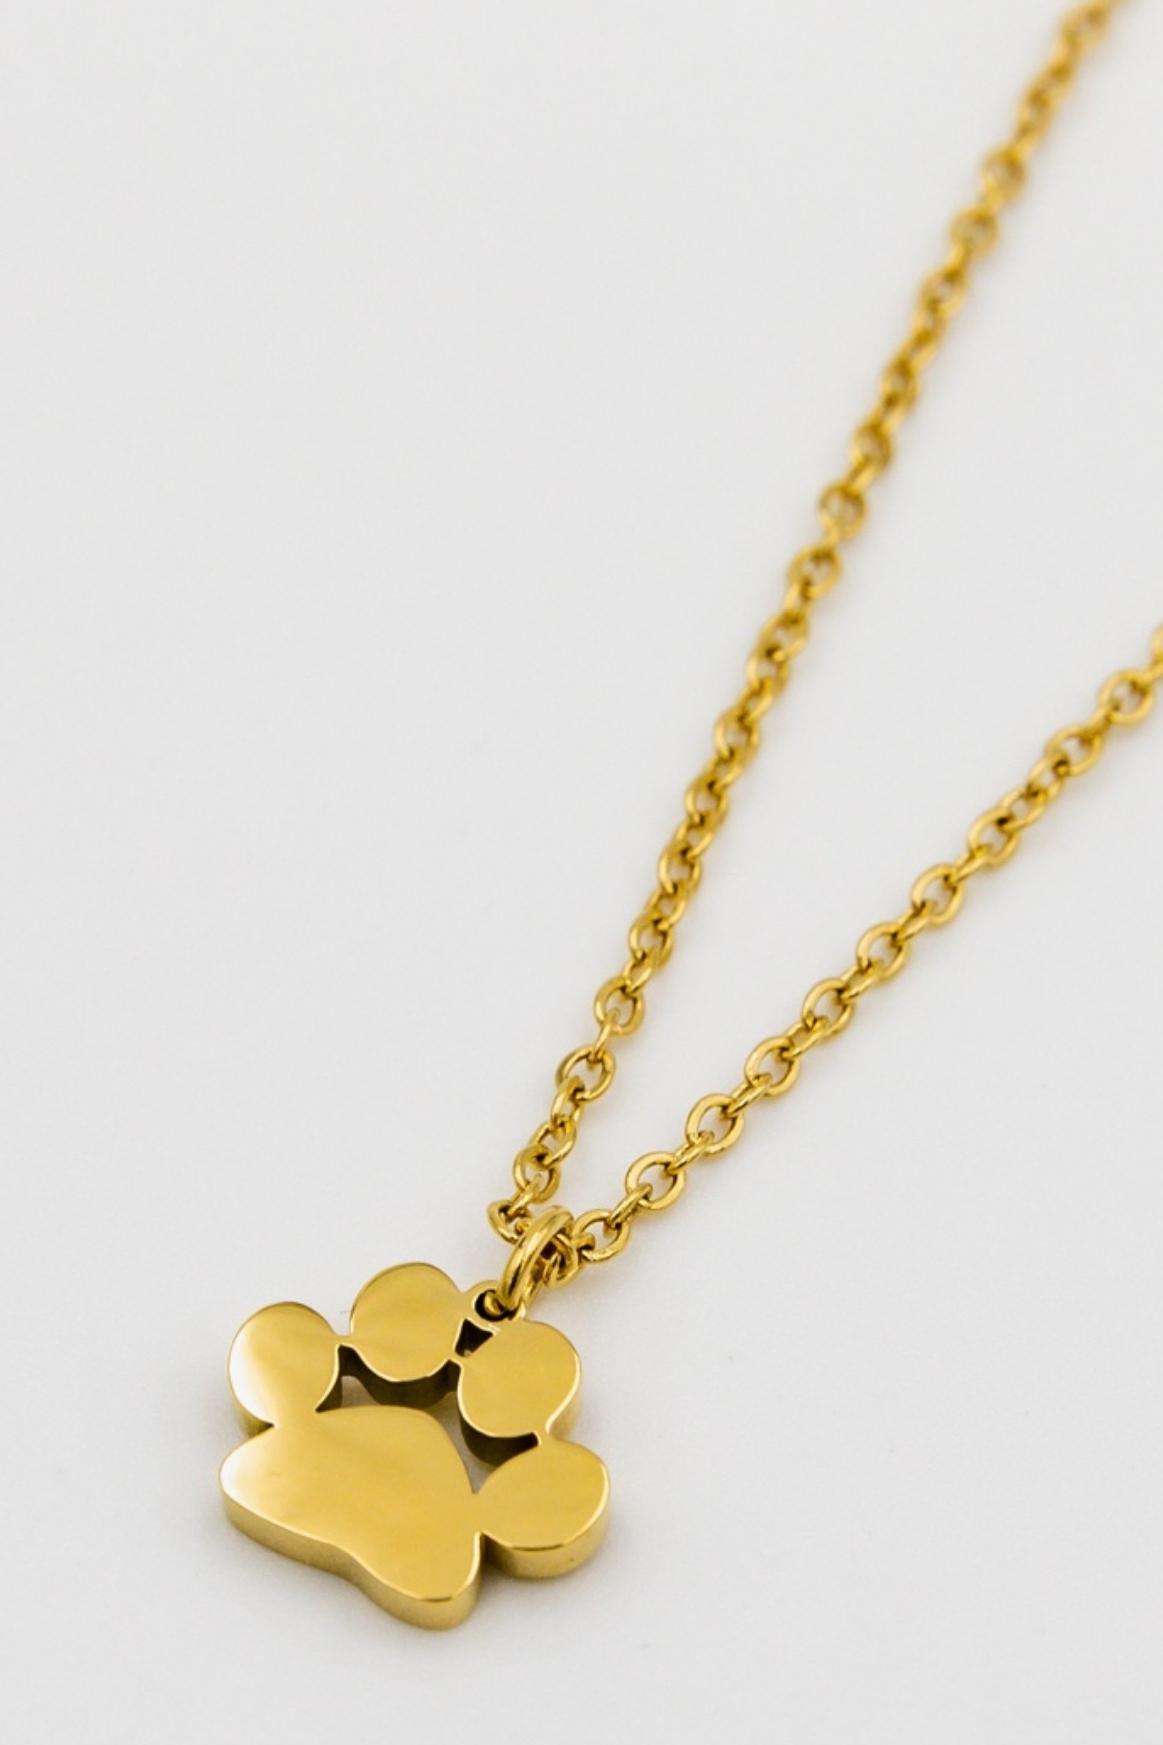 Buy Actual Dog Paw Print Necklace Dog Remembrance Gift Dog Paw Print Jewelry  Memorial Pet Necklace Dog Cat Pet Loss Jewelry Online in India - Etsy